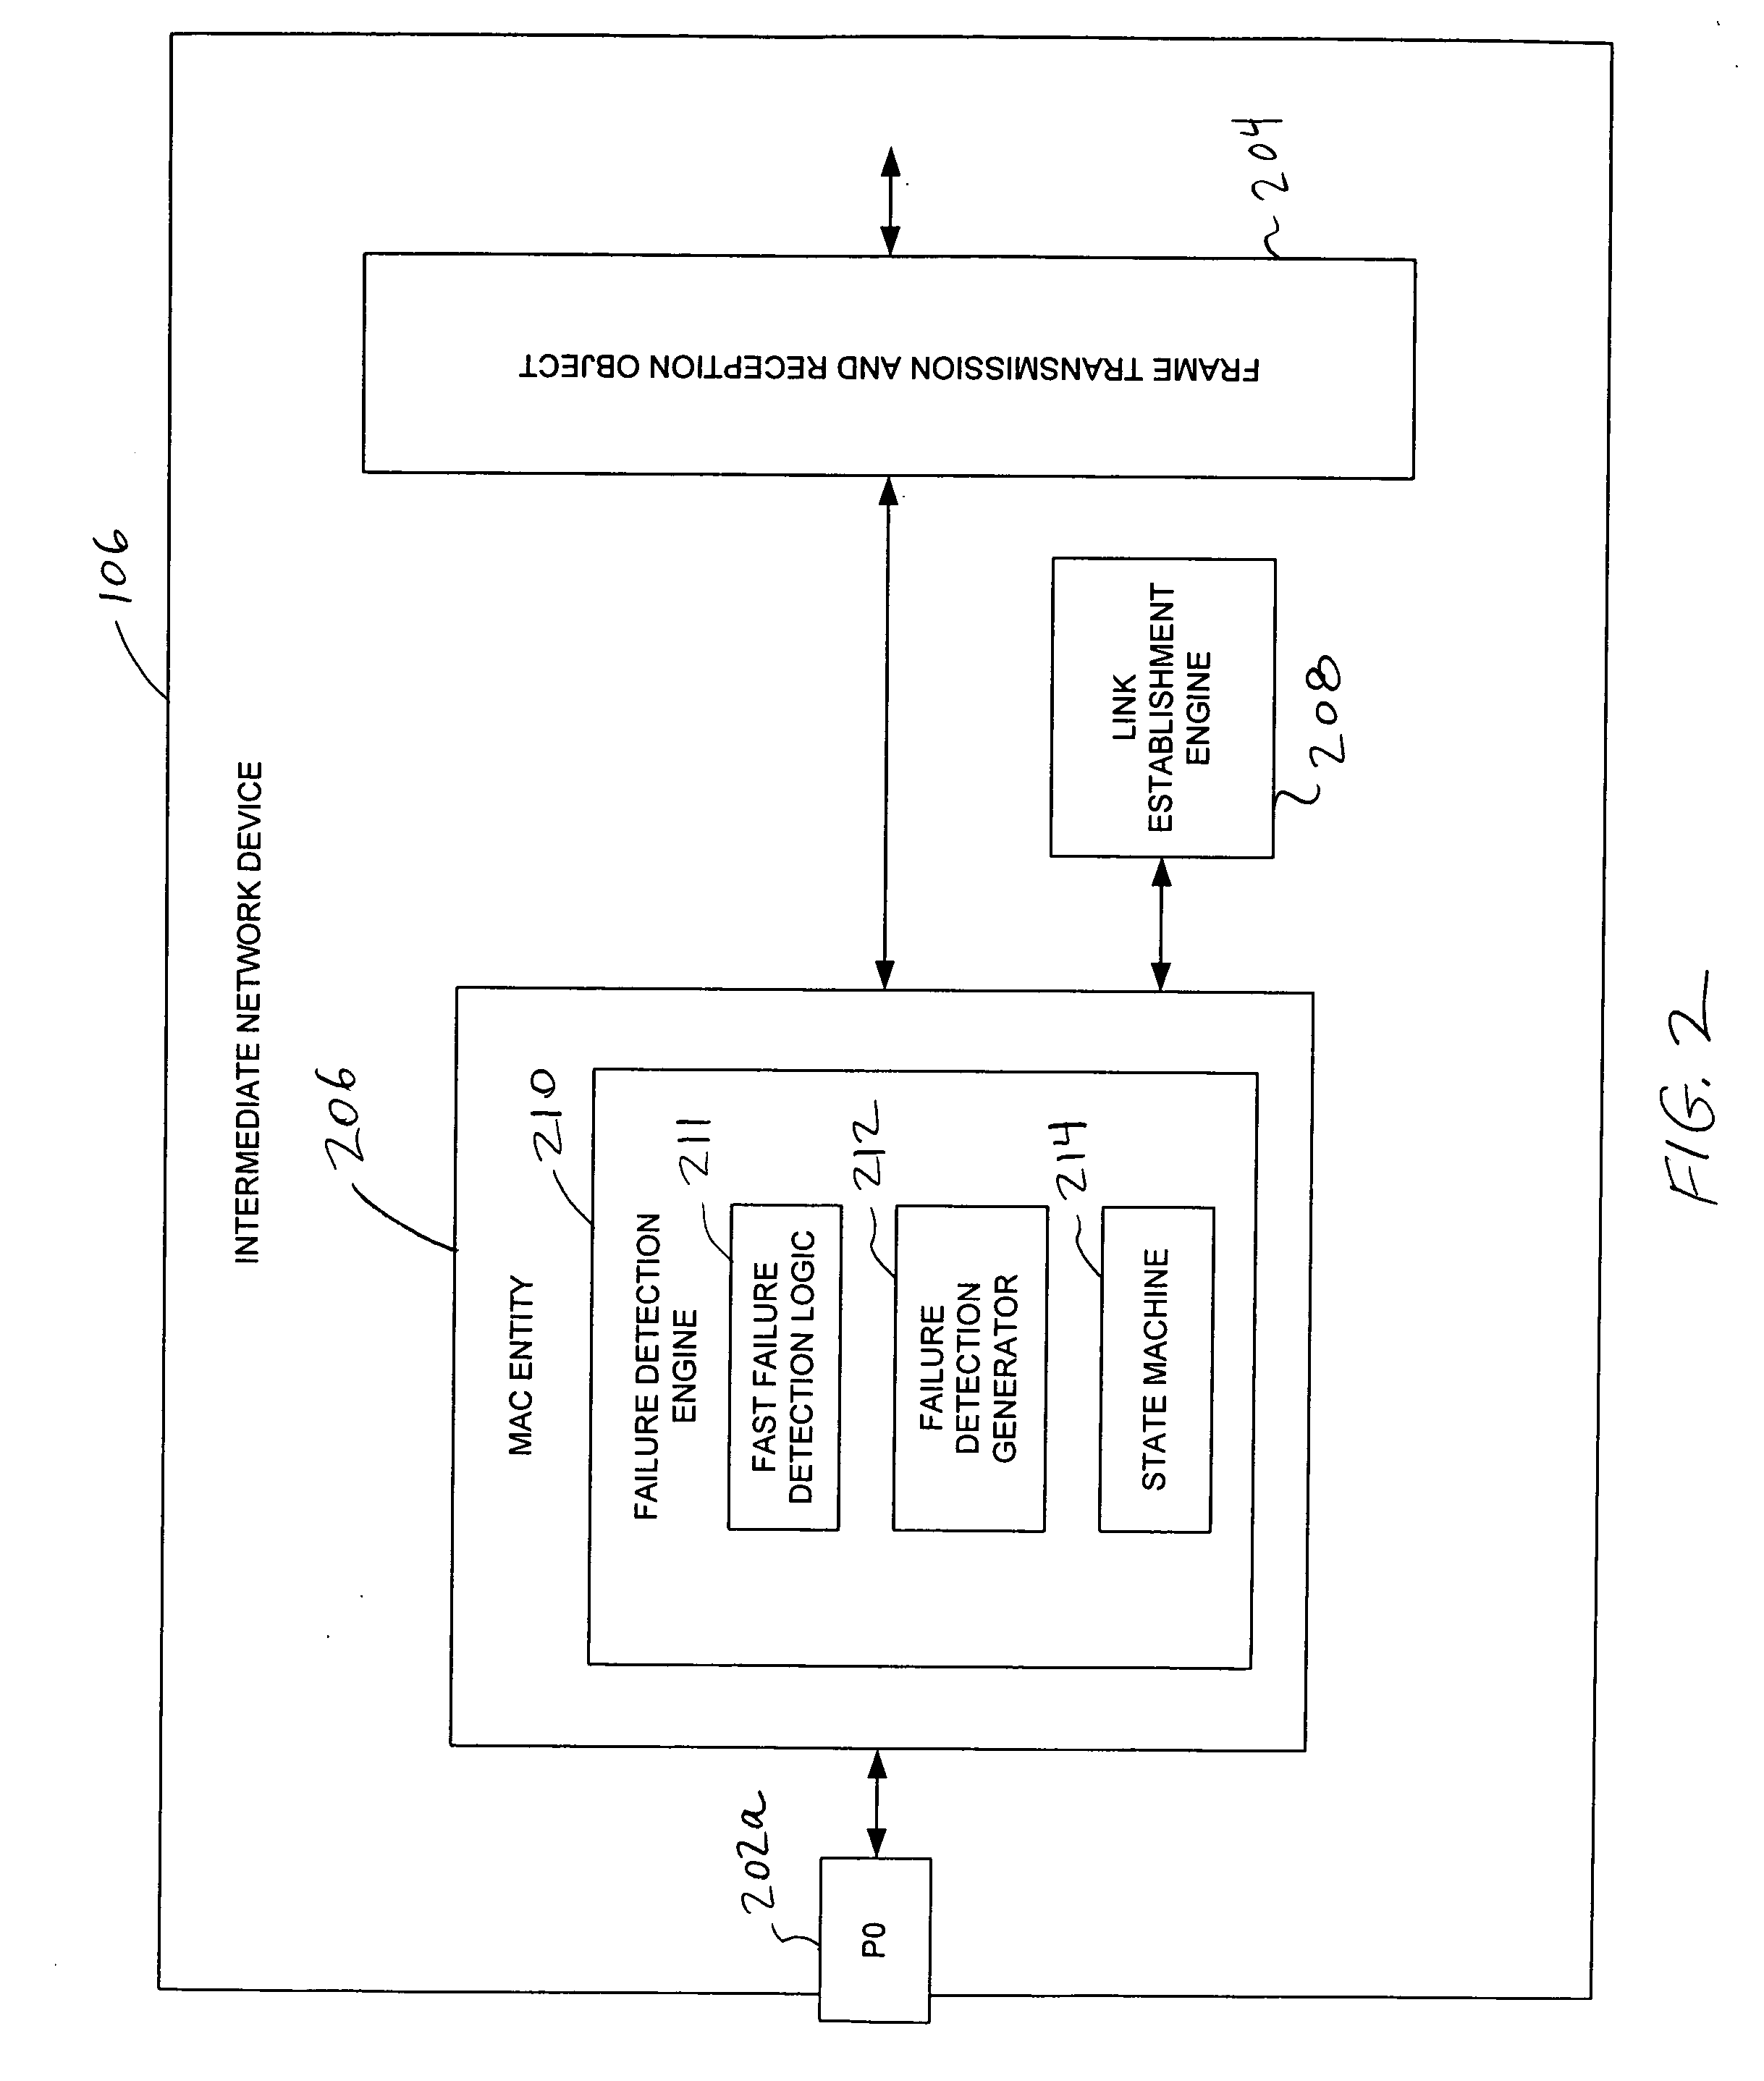 System and method for detecting link failures